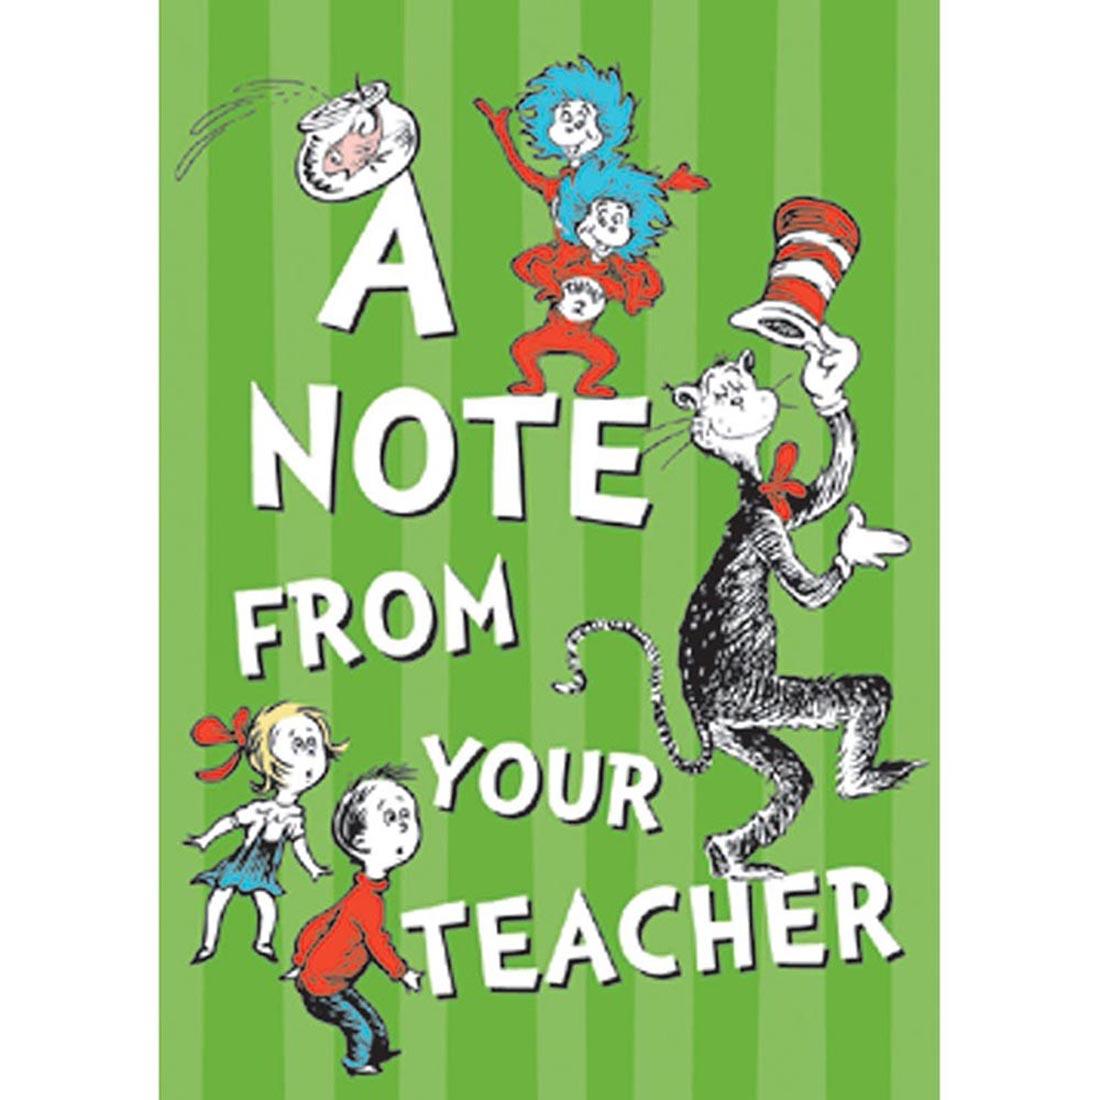 Dr. Seuss Cat in the Hat Teacher Cards by Eureka with the message A Note From Your Teacher